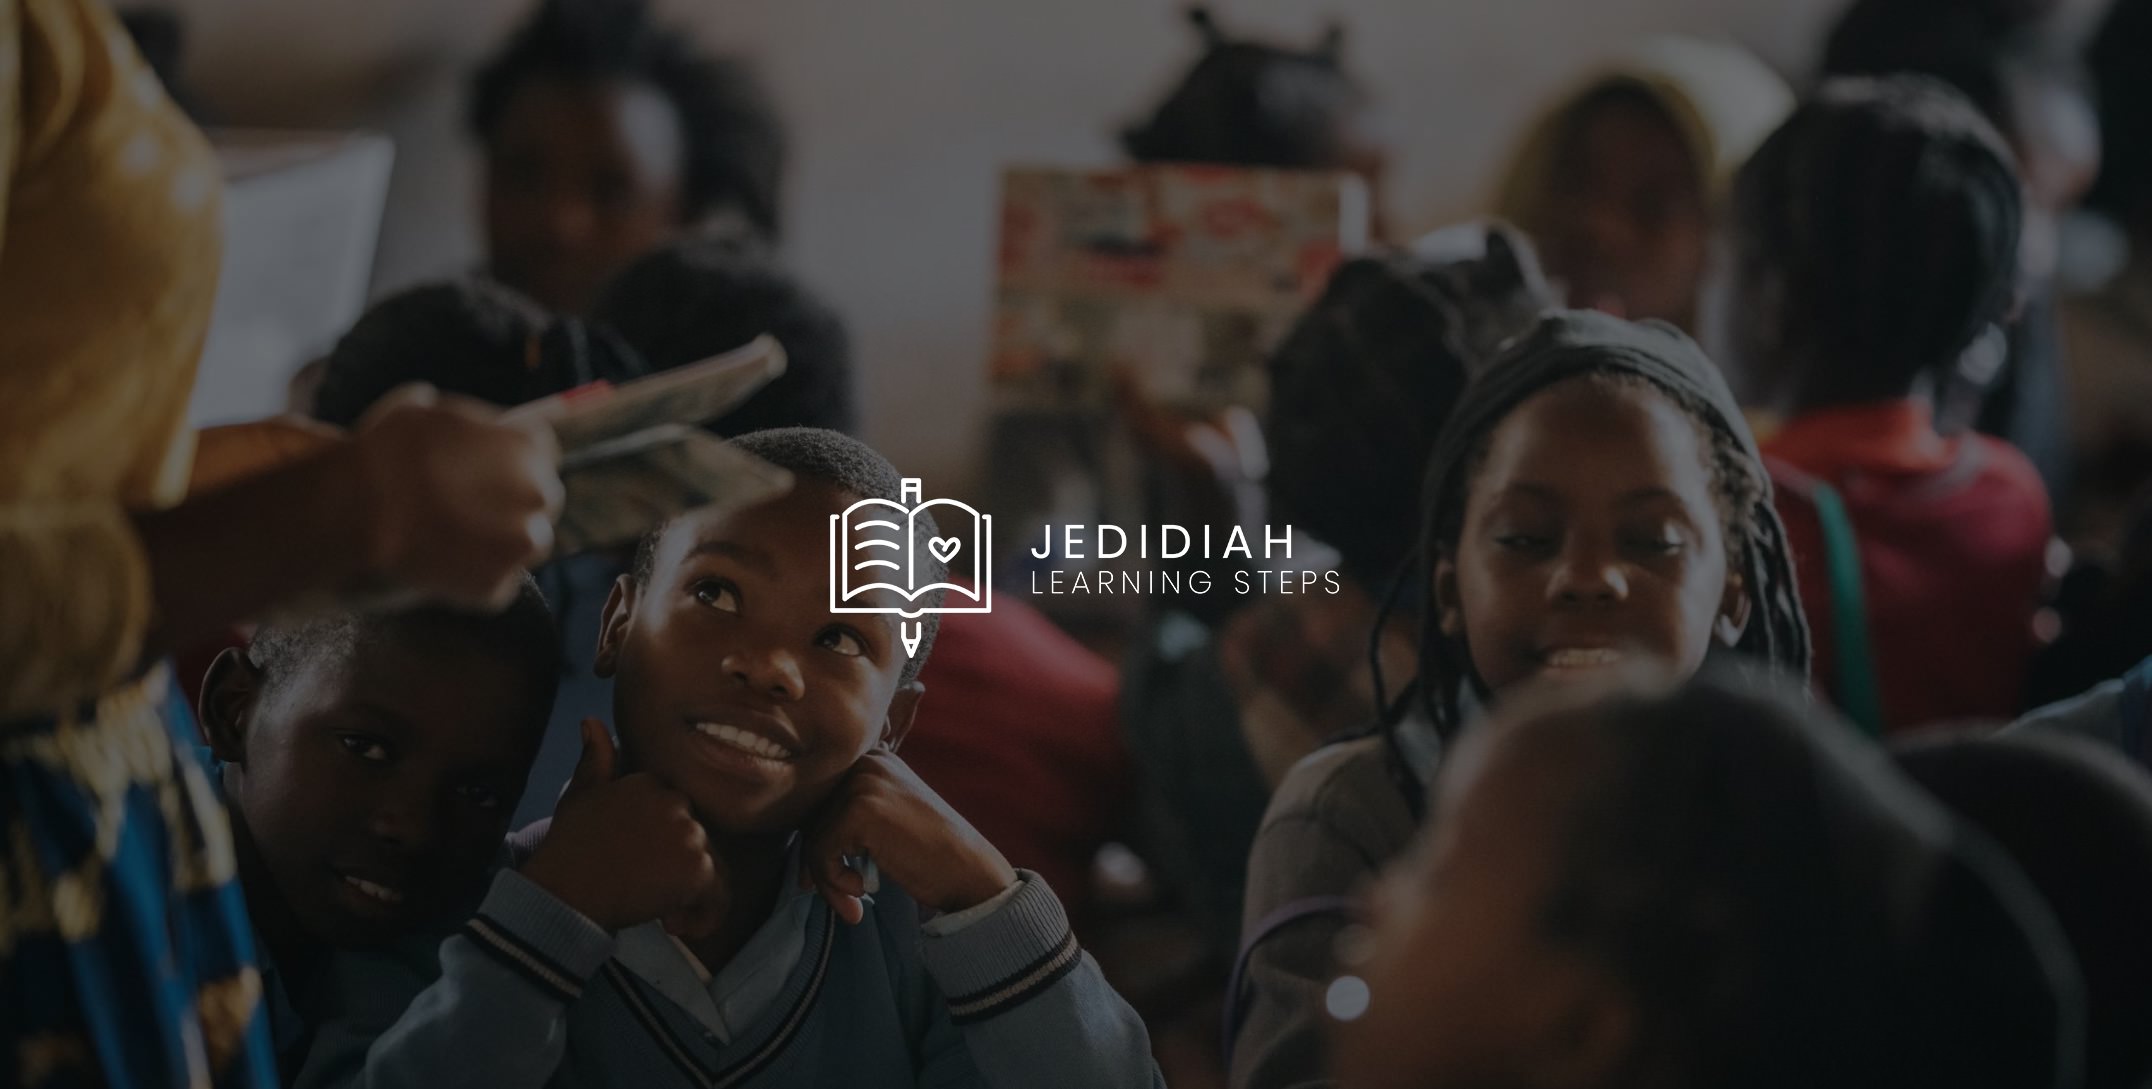 White Jedidiah Learning Steps logo with background of children in a classroom